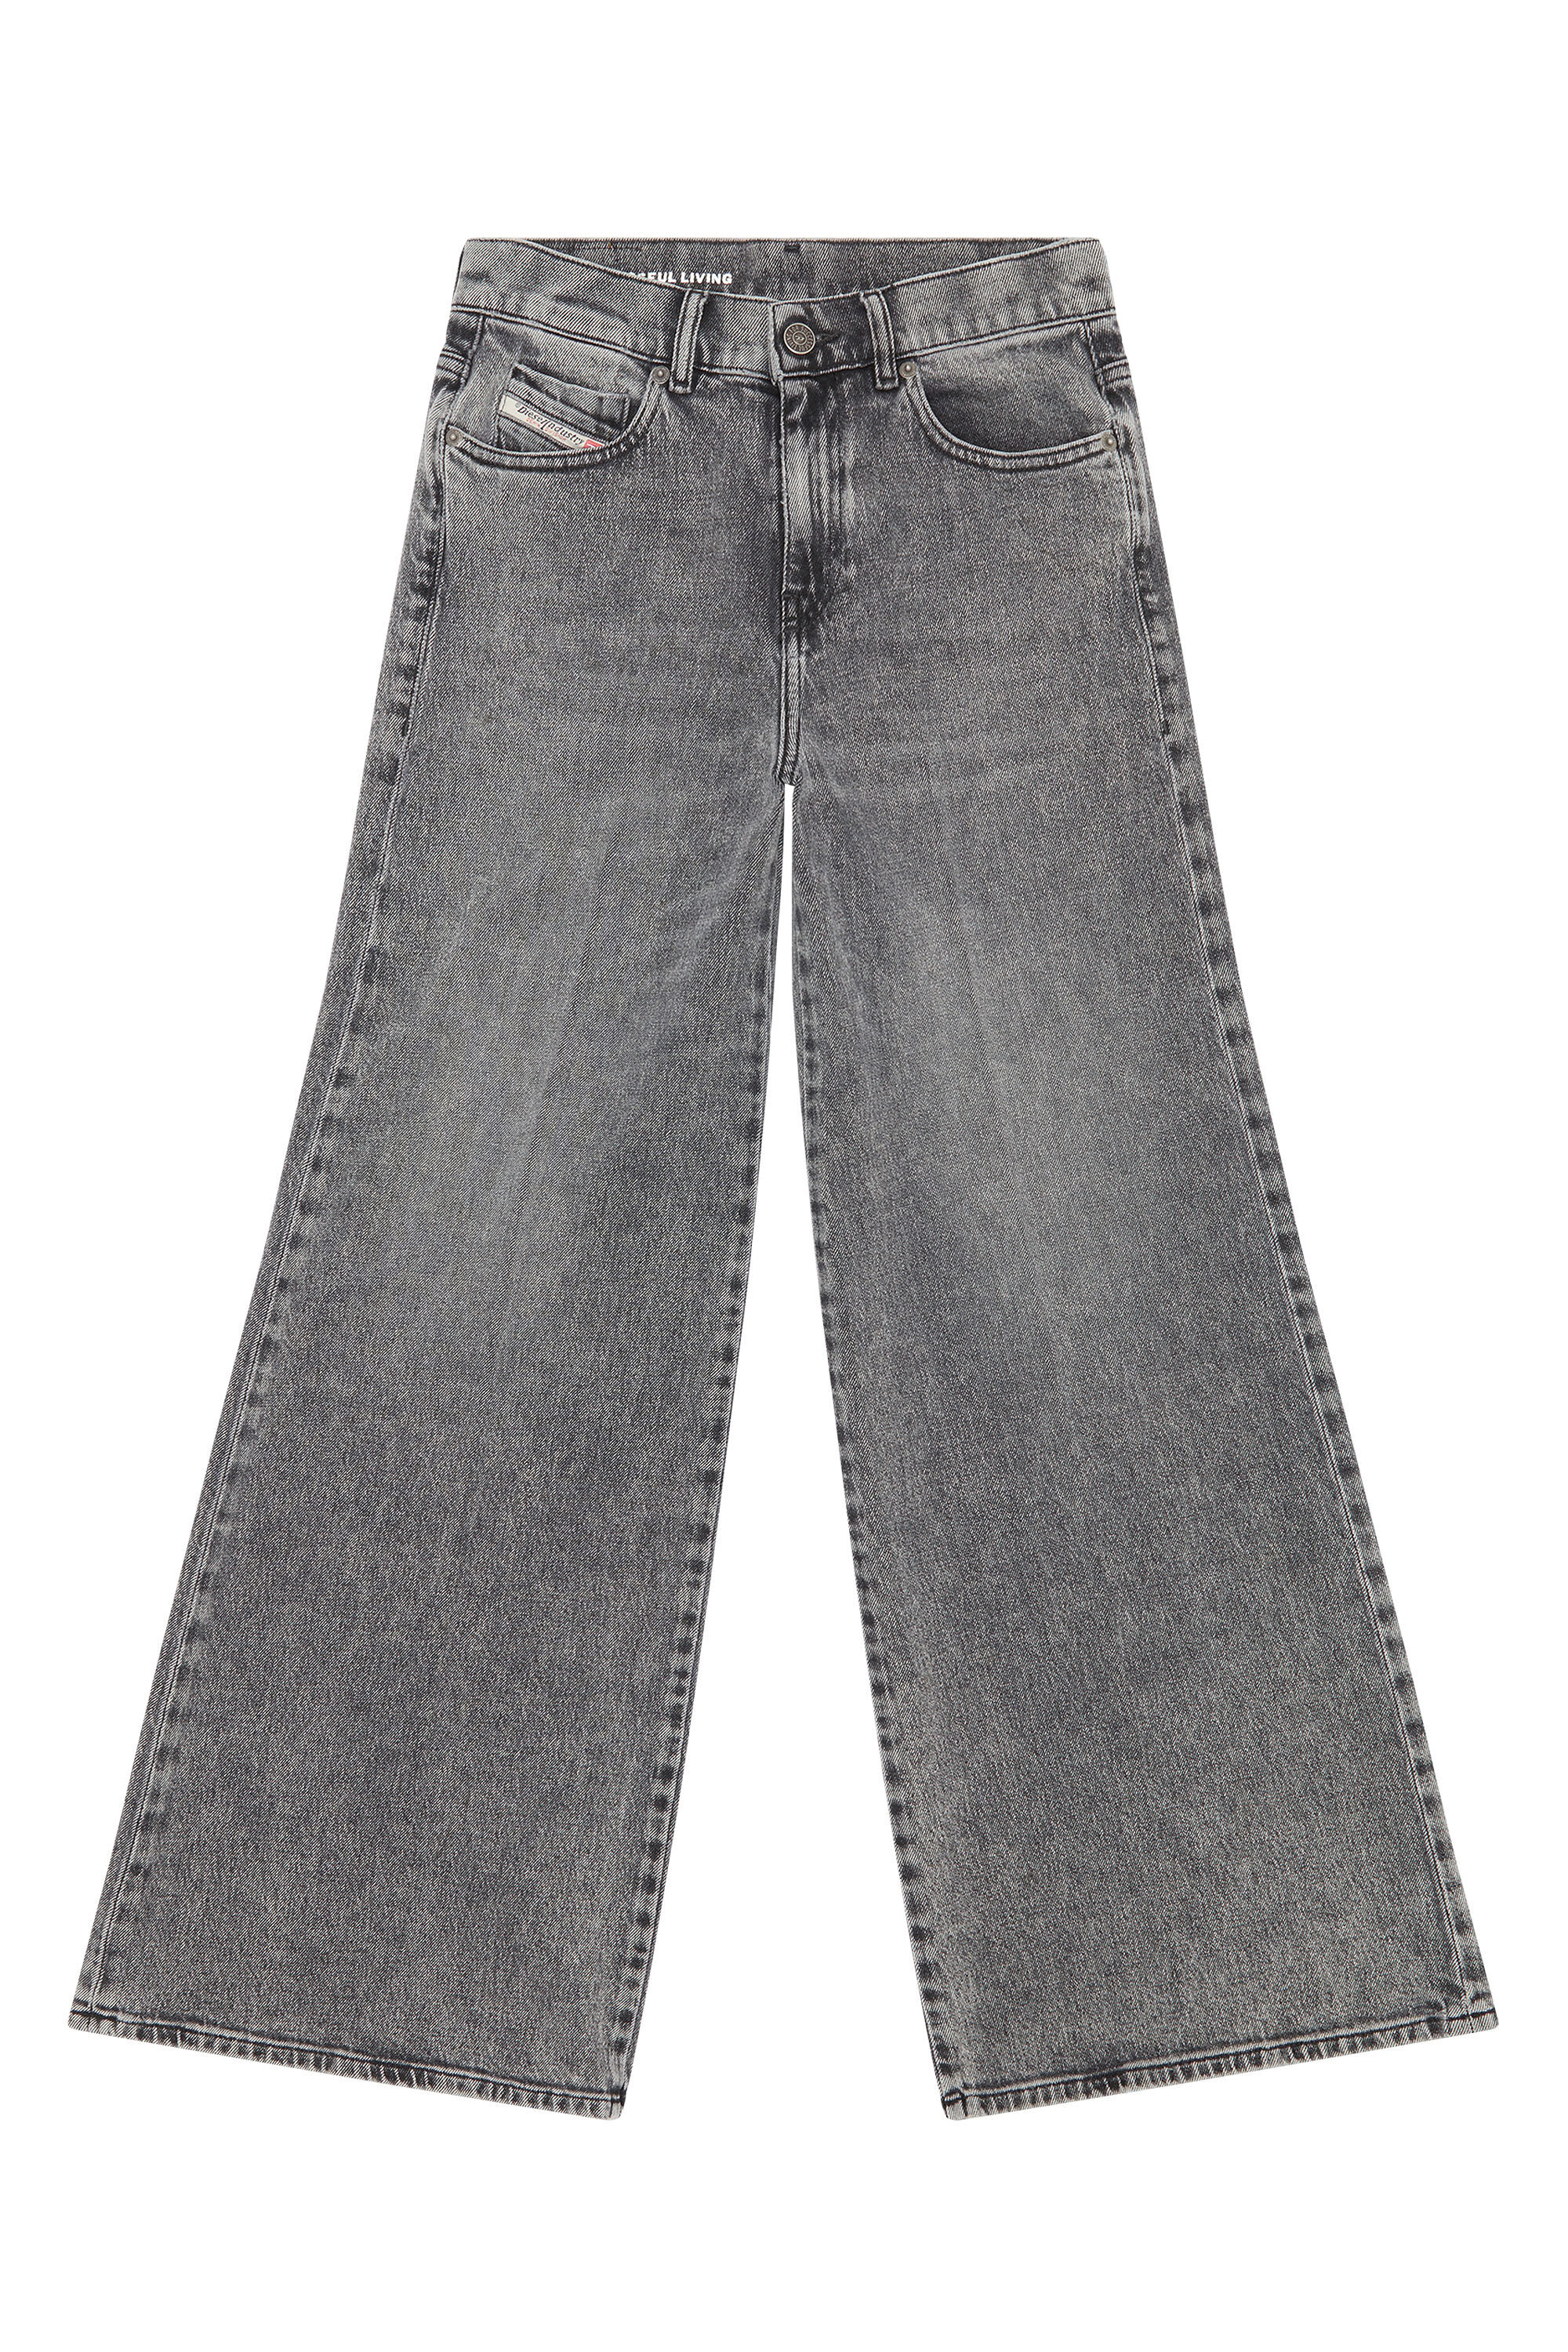 Women's Bootcut and Flare Jeans | Grey | Diesel 1978 D-Akemi